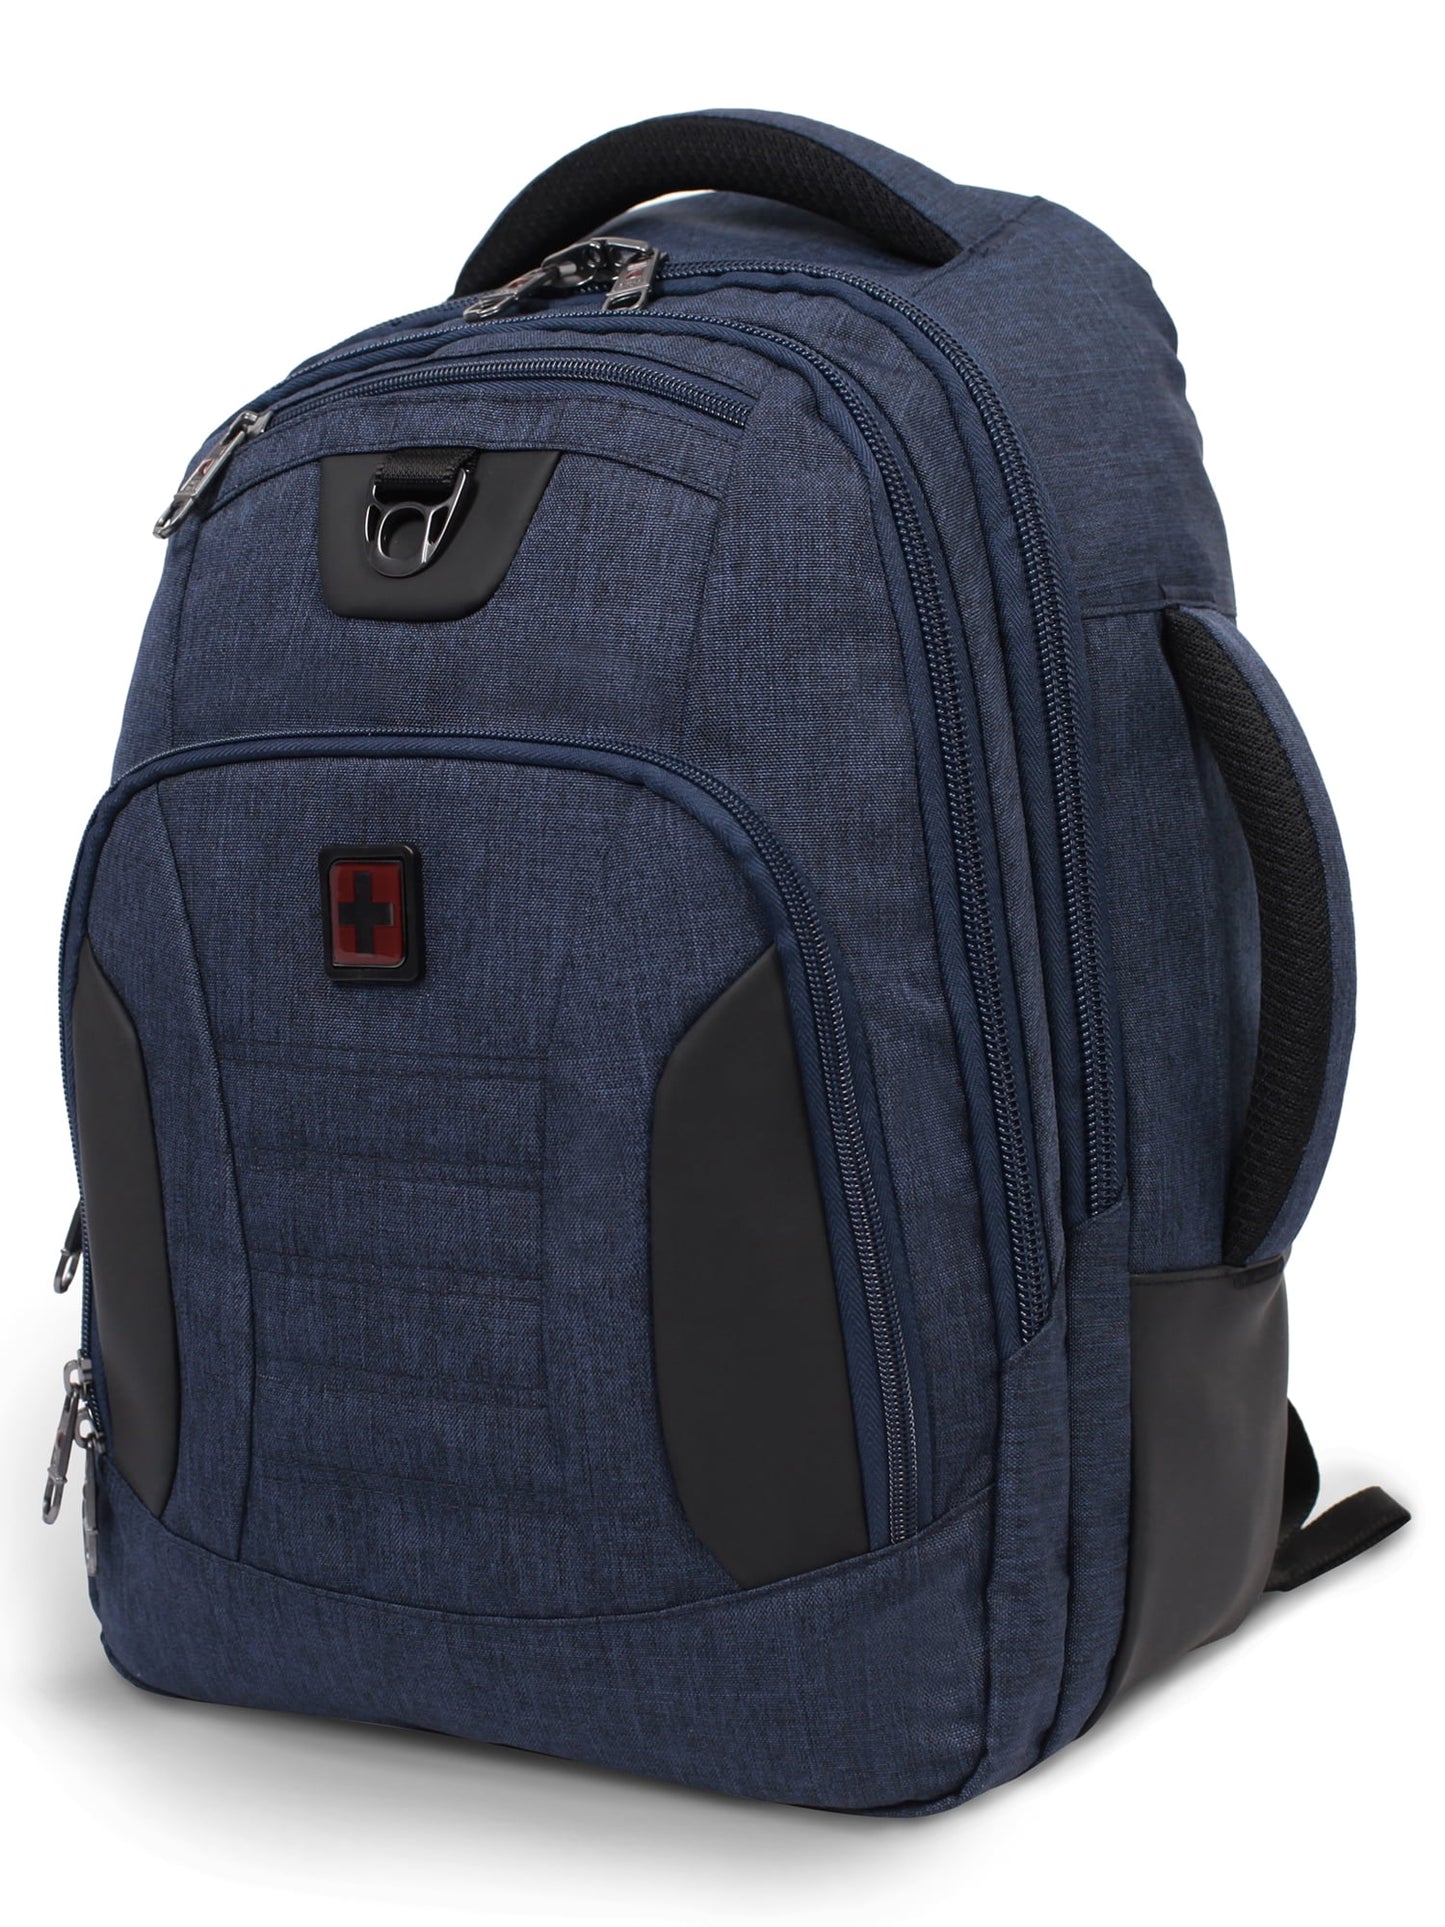 SwissTech Excursion 18" Travel Backpack with USB Port, Unisex Blue All Ages